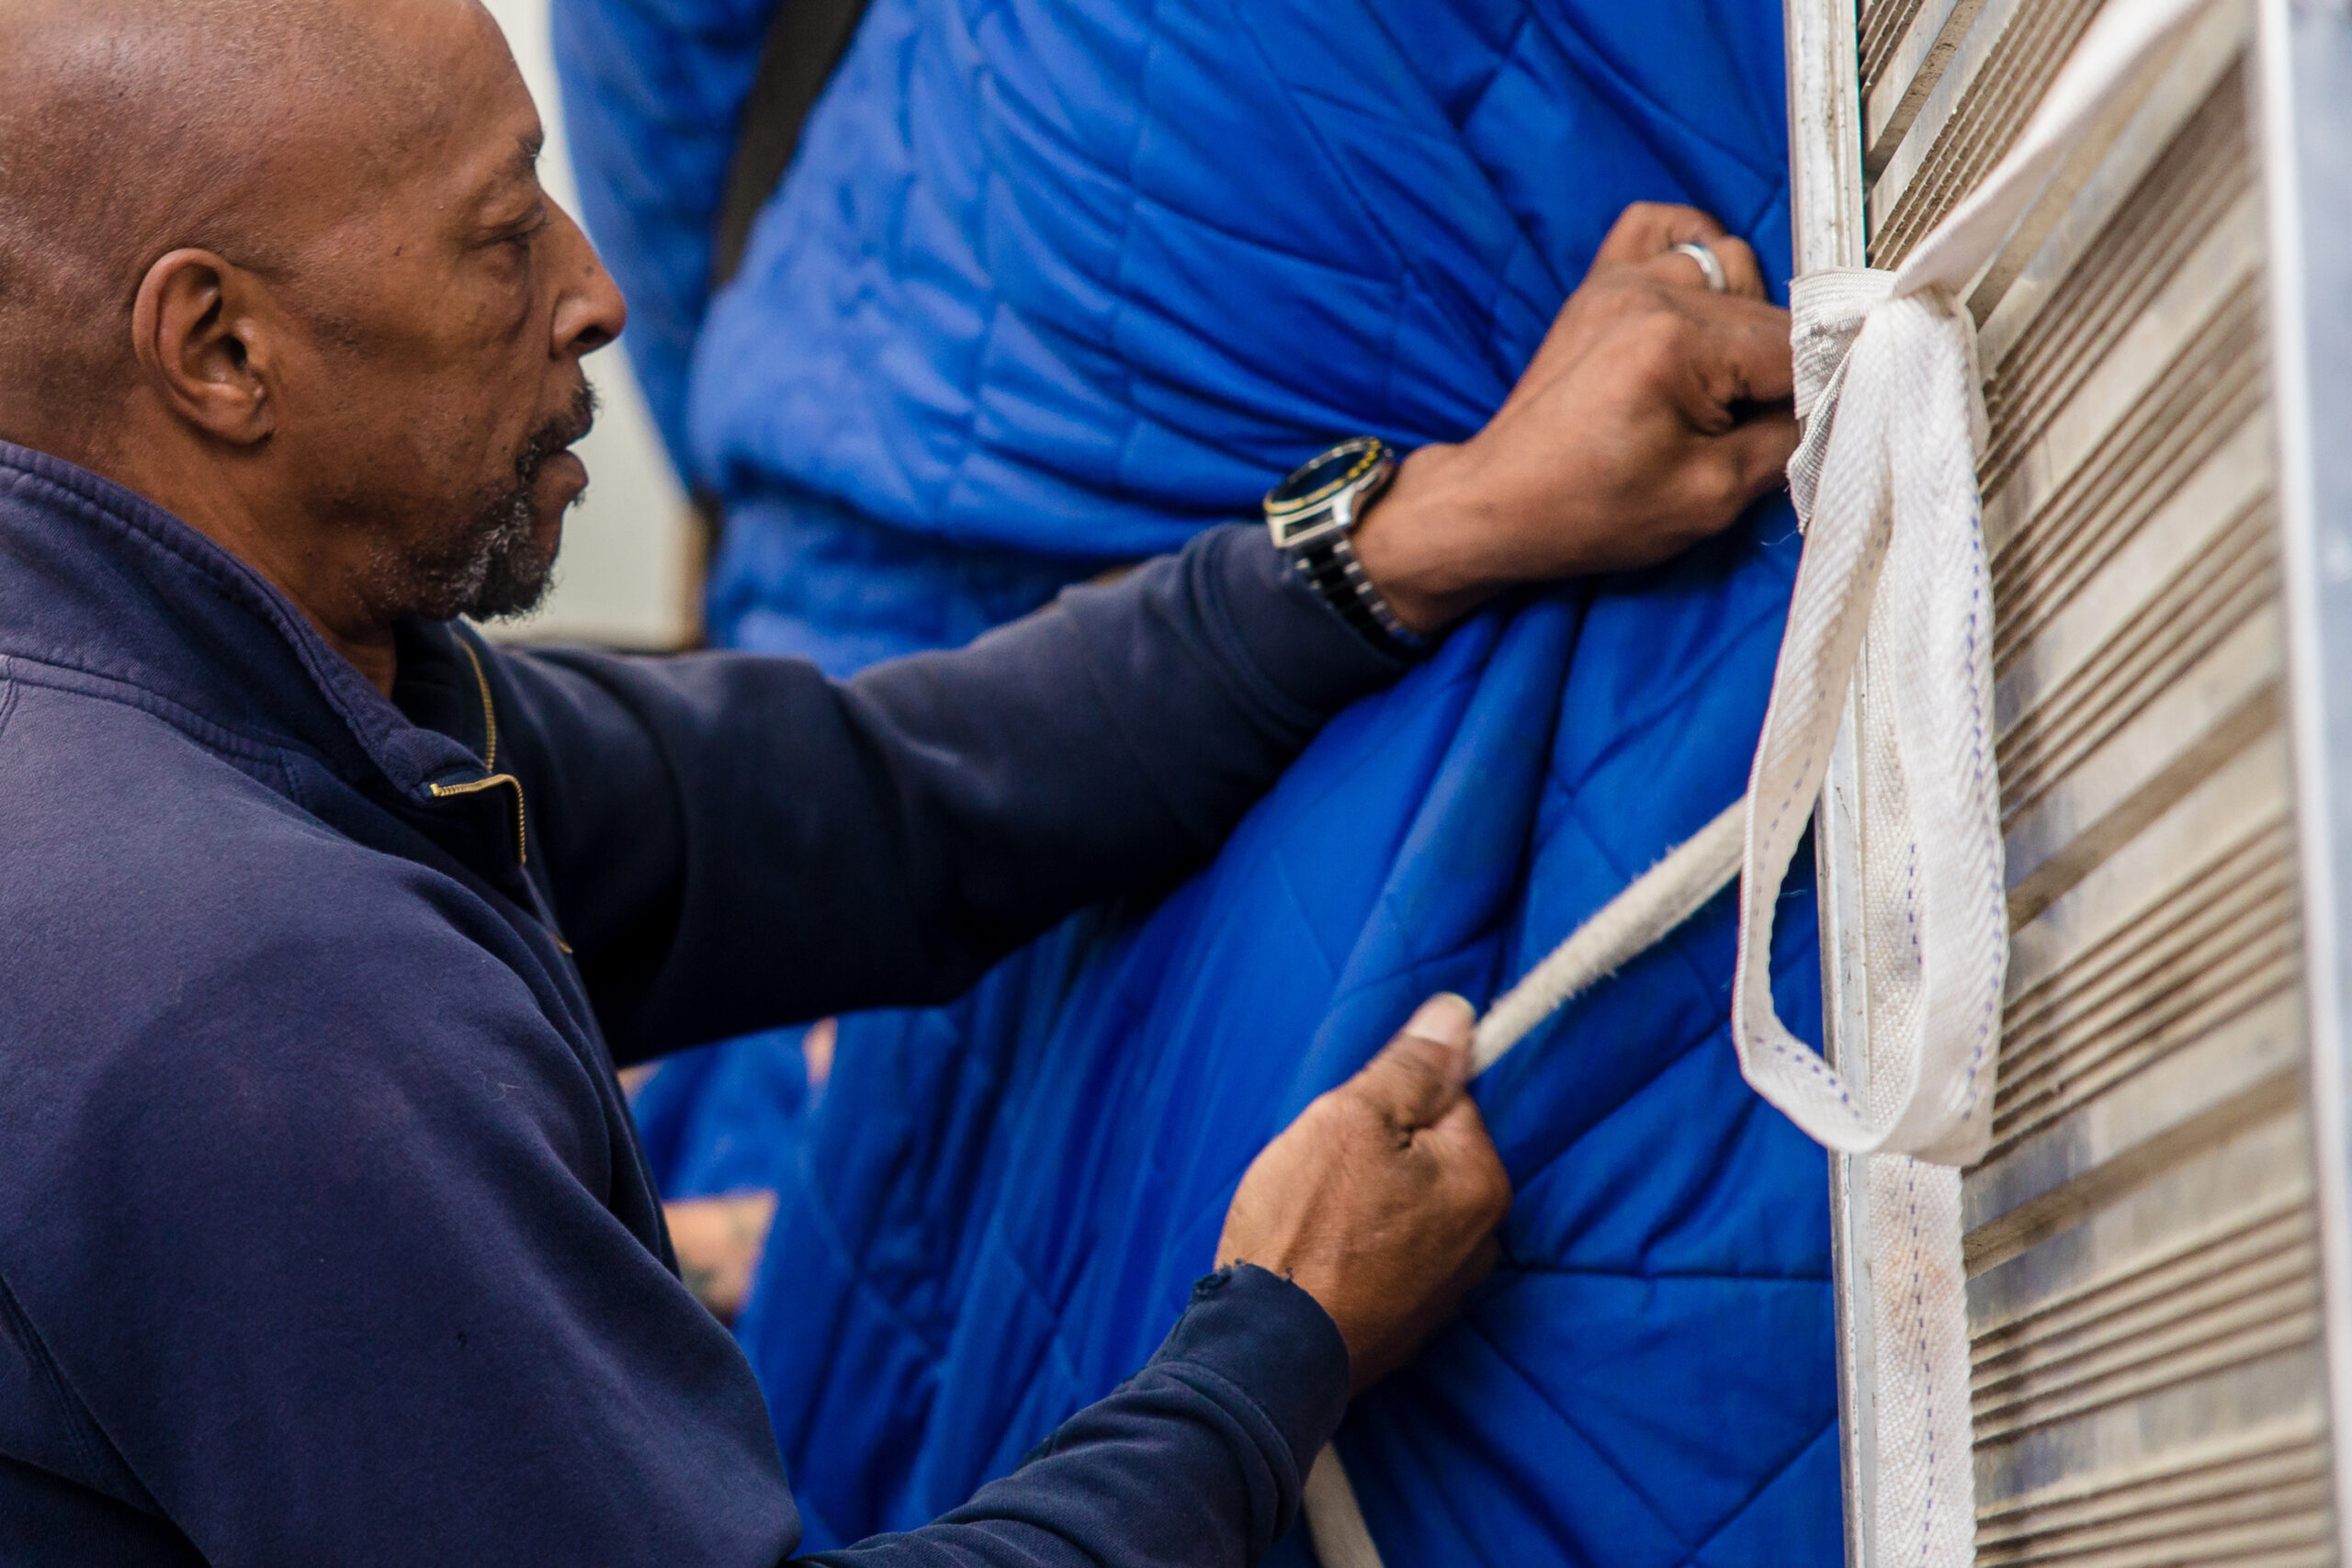 A removals and storage man secures a unique item within the back of the van covered in a blue blanket.